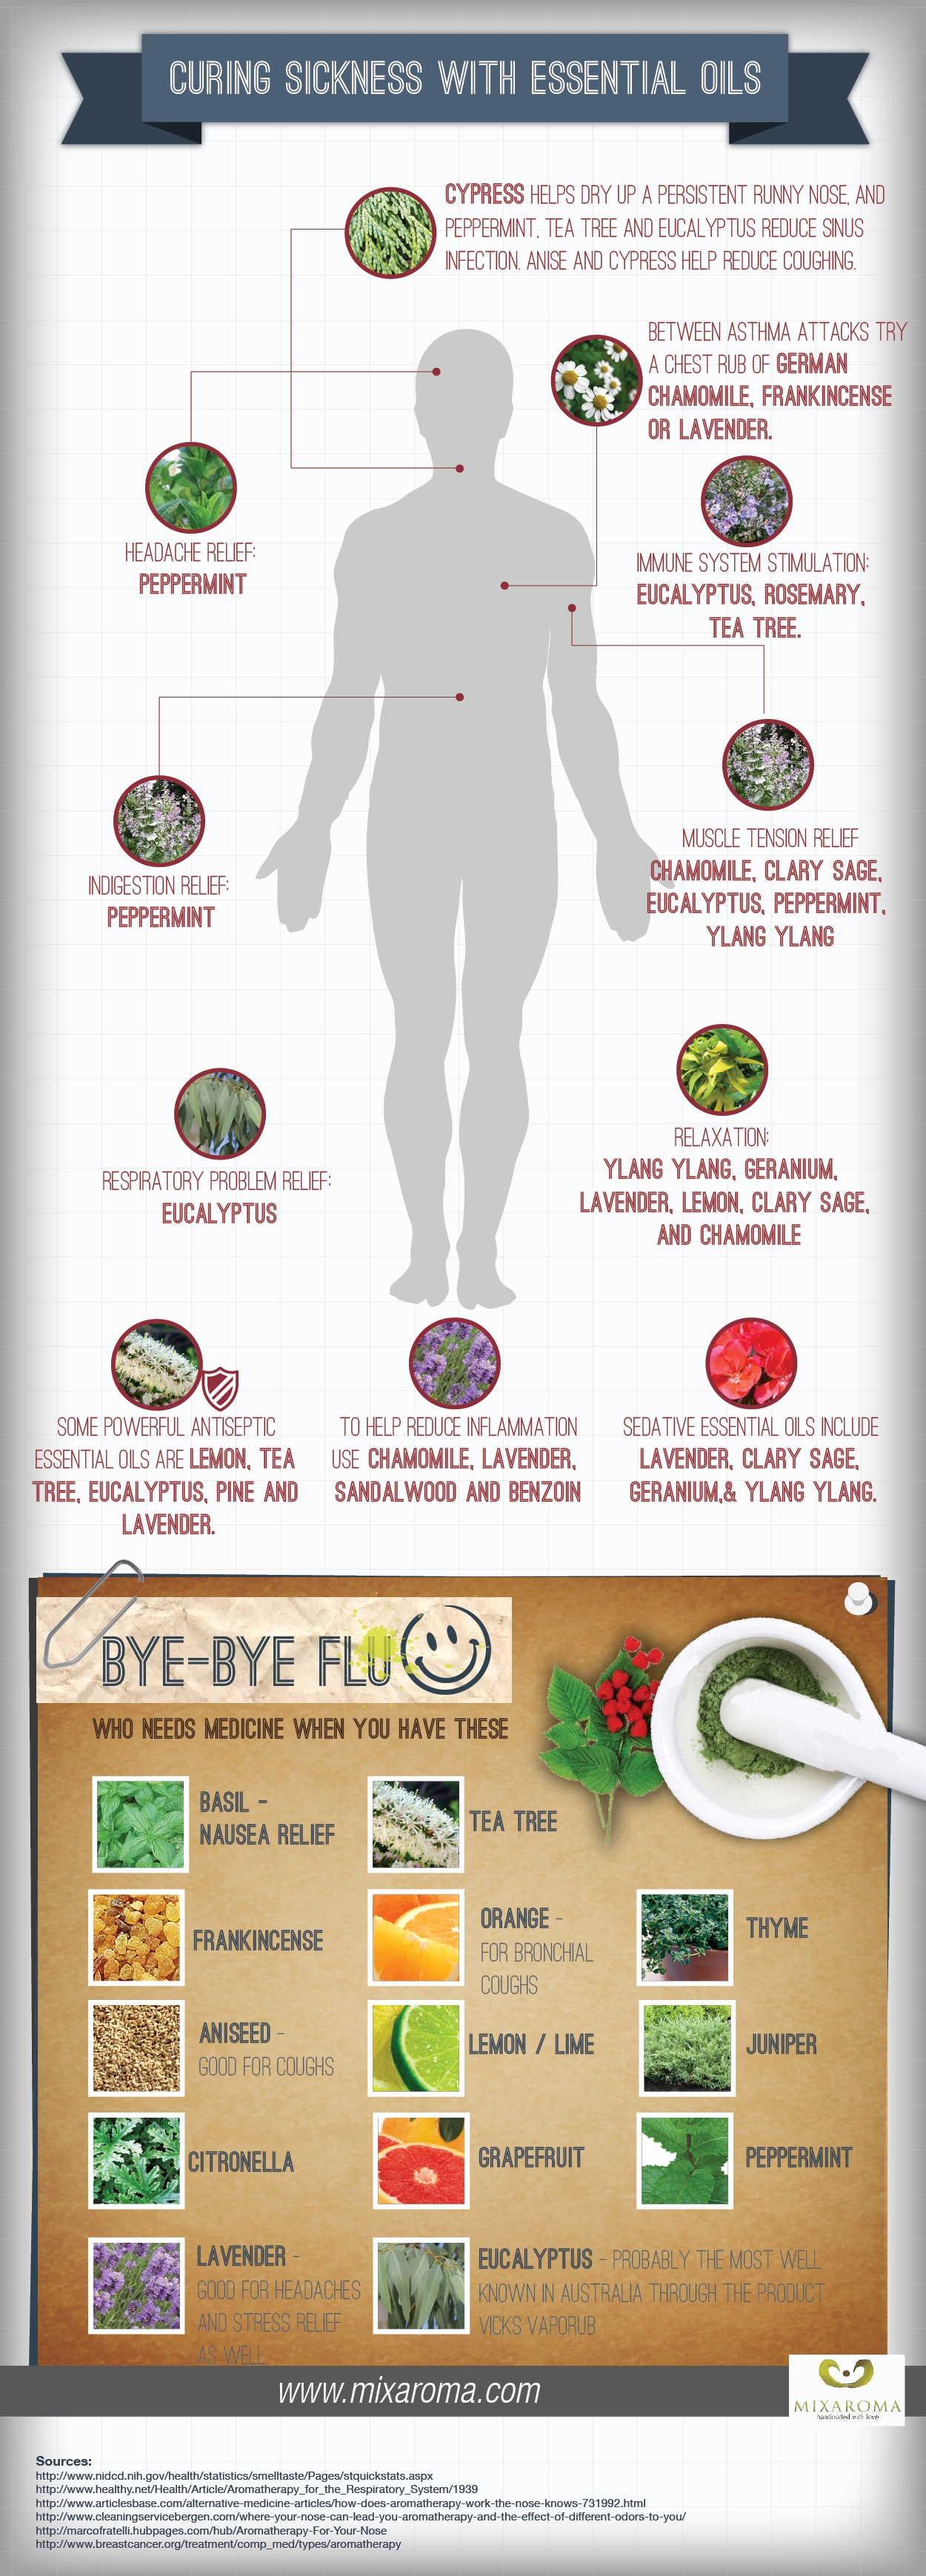 Common Illnesses And Their Essential Oil Solutions Infographic